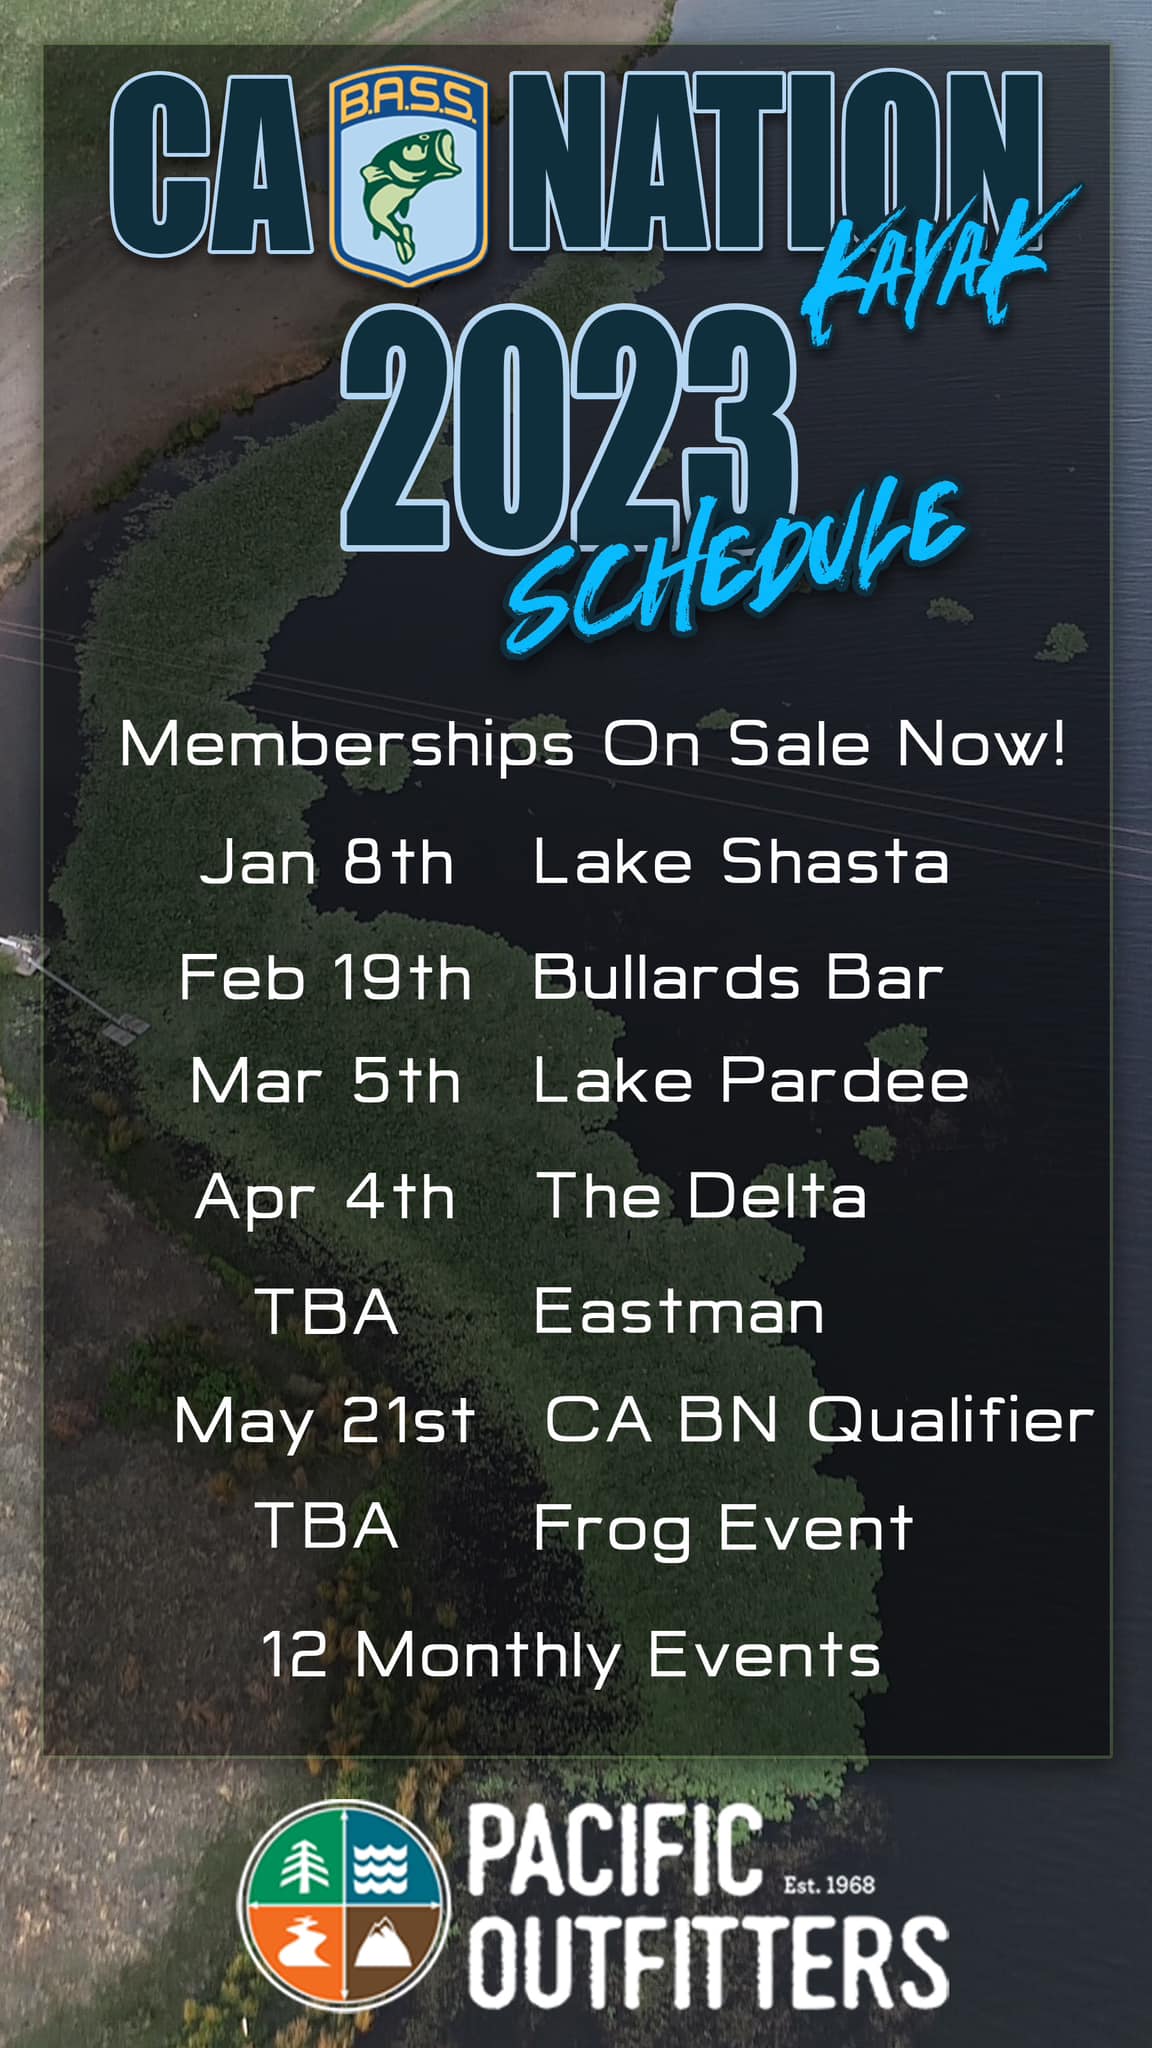 2023 schedule for the CA Bass Nation Kayak